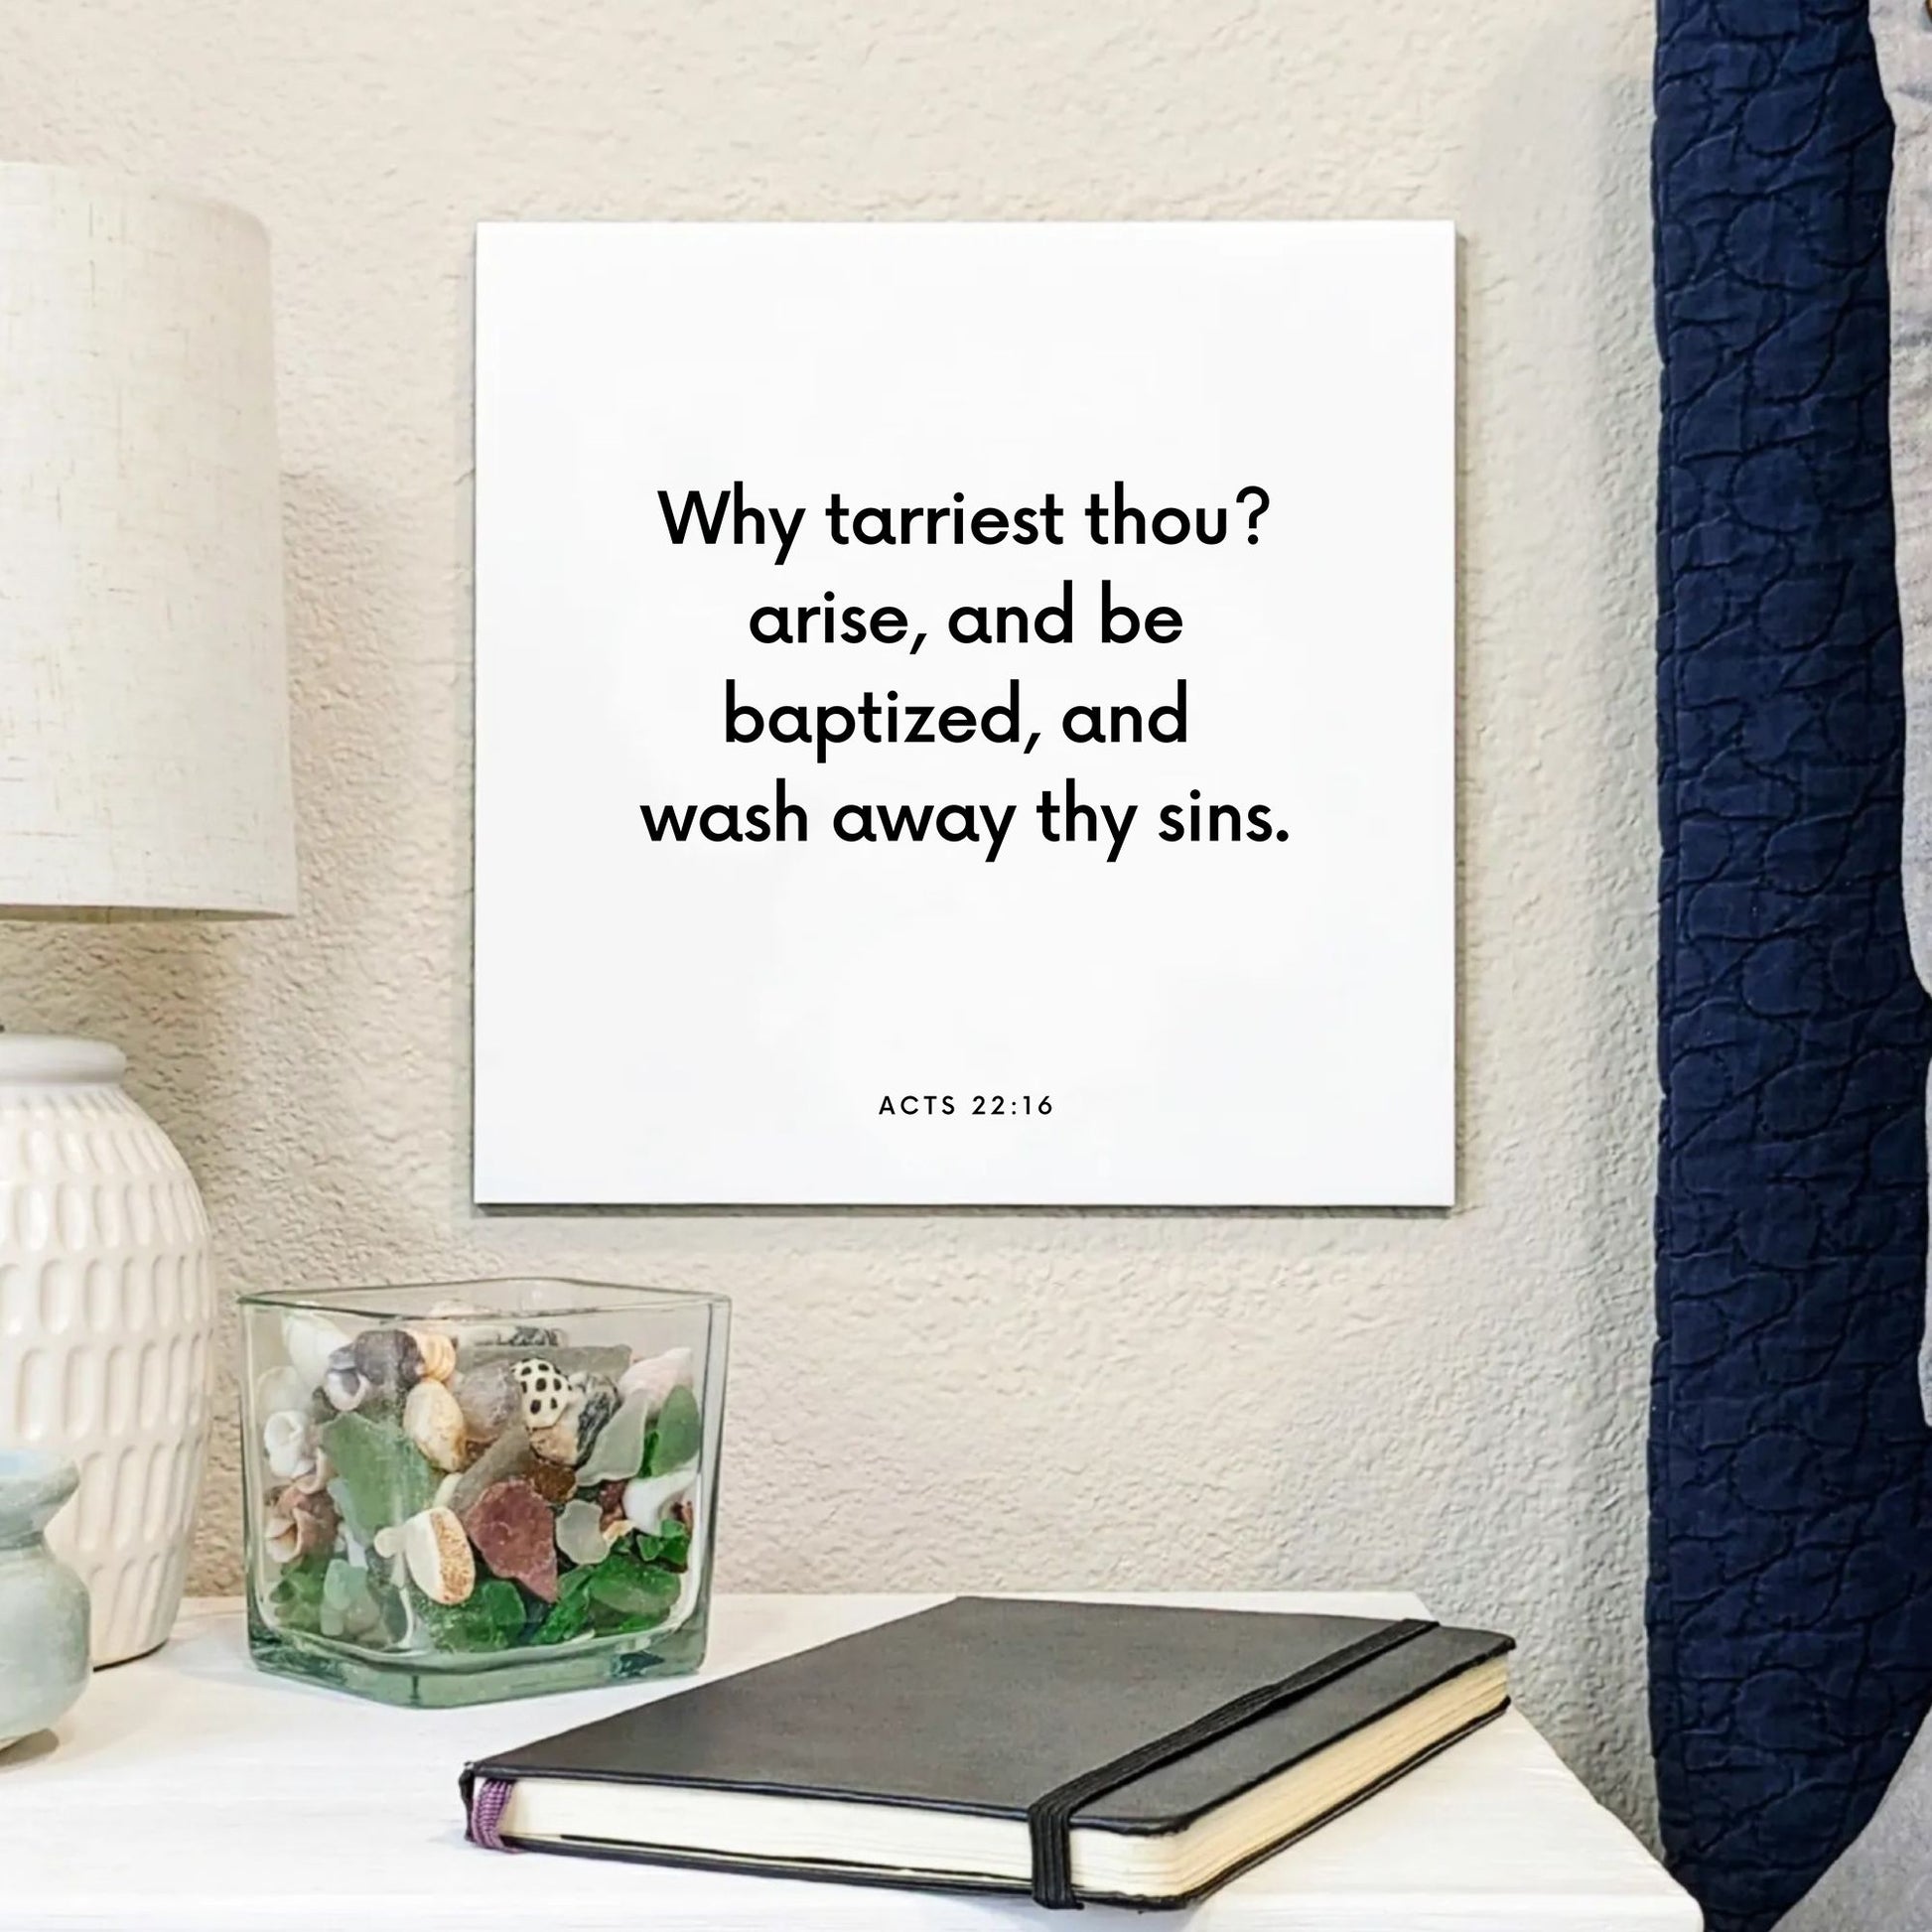 Bedside mouting of the scripture tile for Acts 22:16 - "Why tarriest thou? arise, and be baptized"